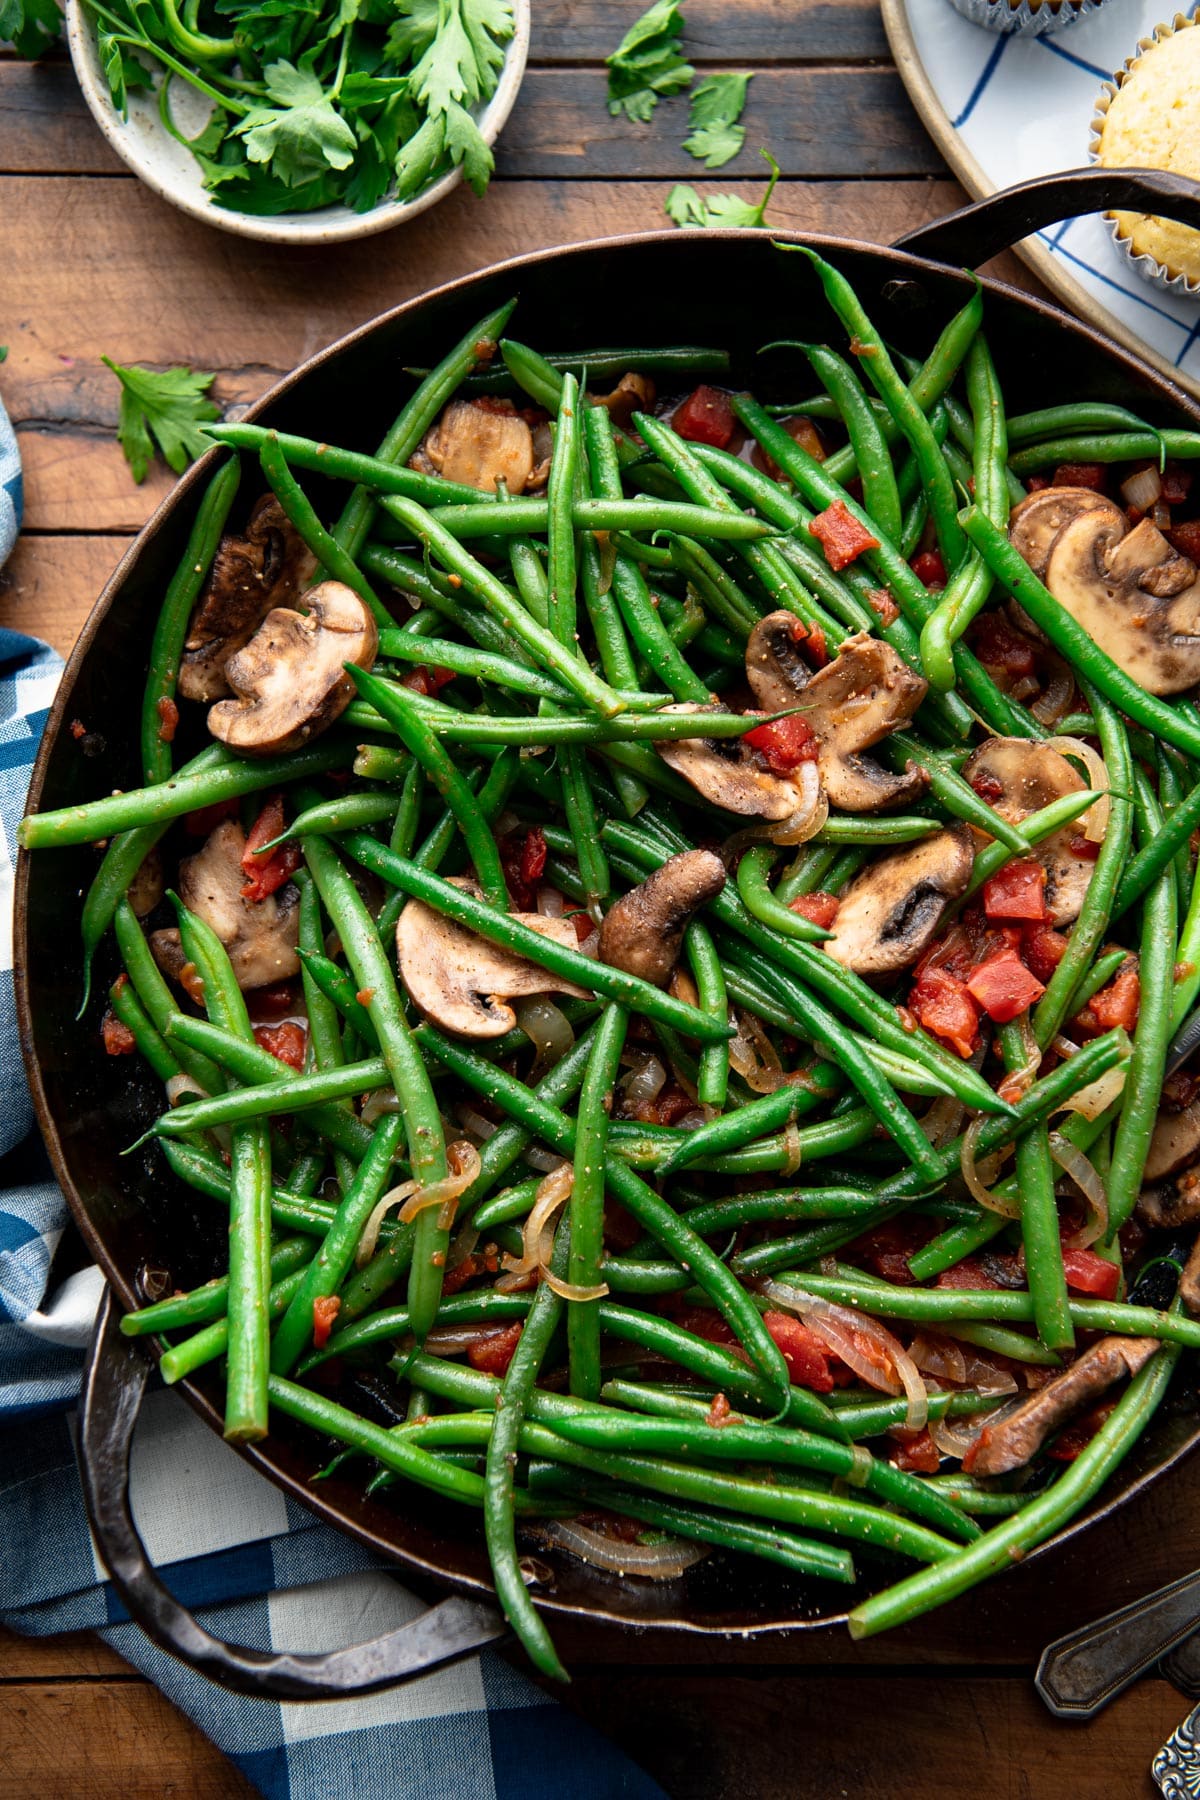 Overhead image of green beans with mushrooms in a cast iron pan.